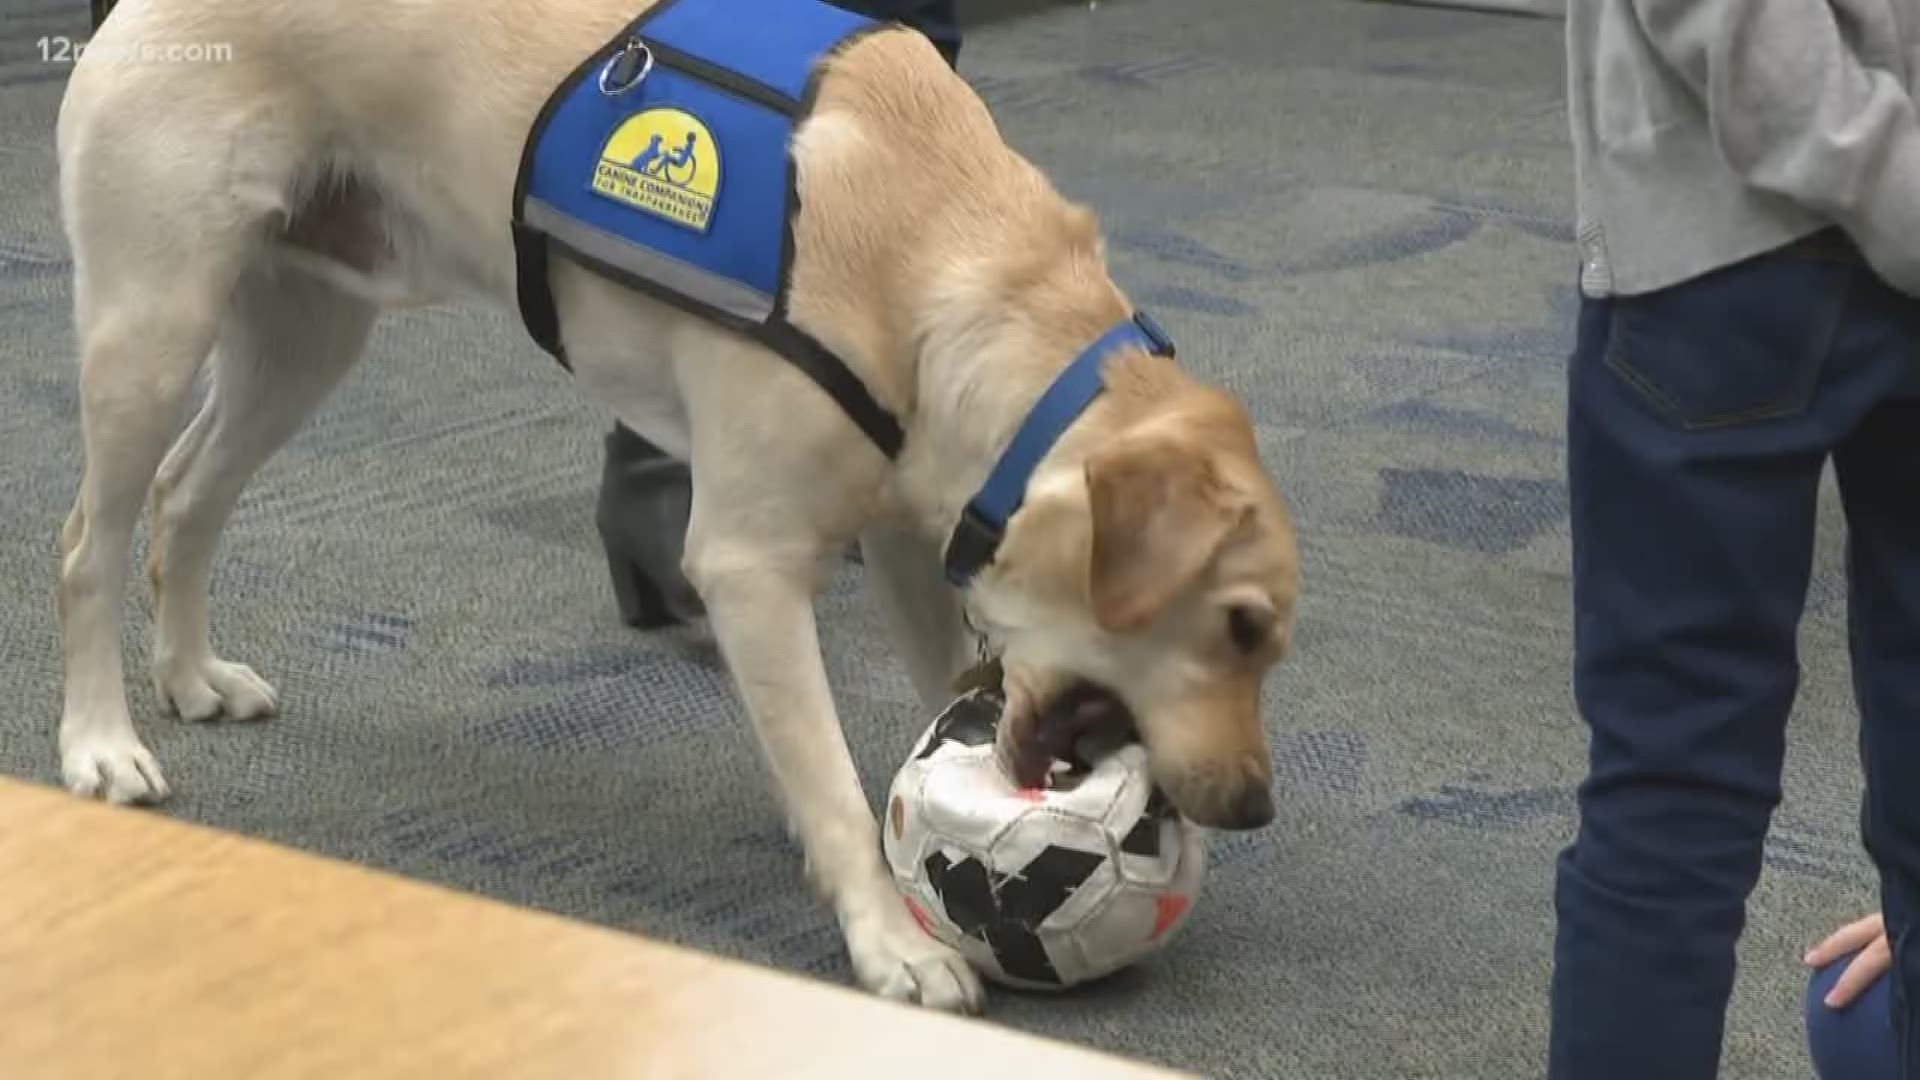 The nonprofit, Canine Companions for Independence, is making magic happen for school children in one Ahwatukee elementary school. Bolt helps motivate children and keep them focused while in the classroom.